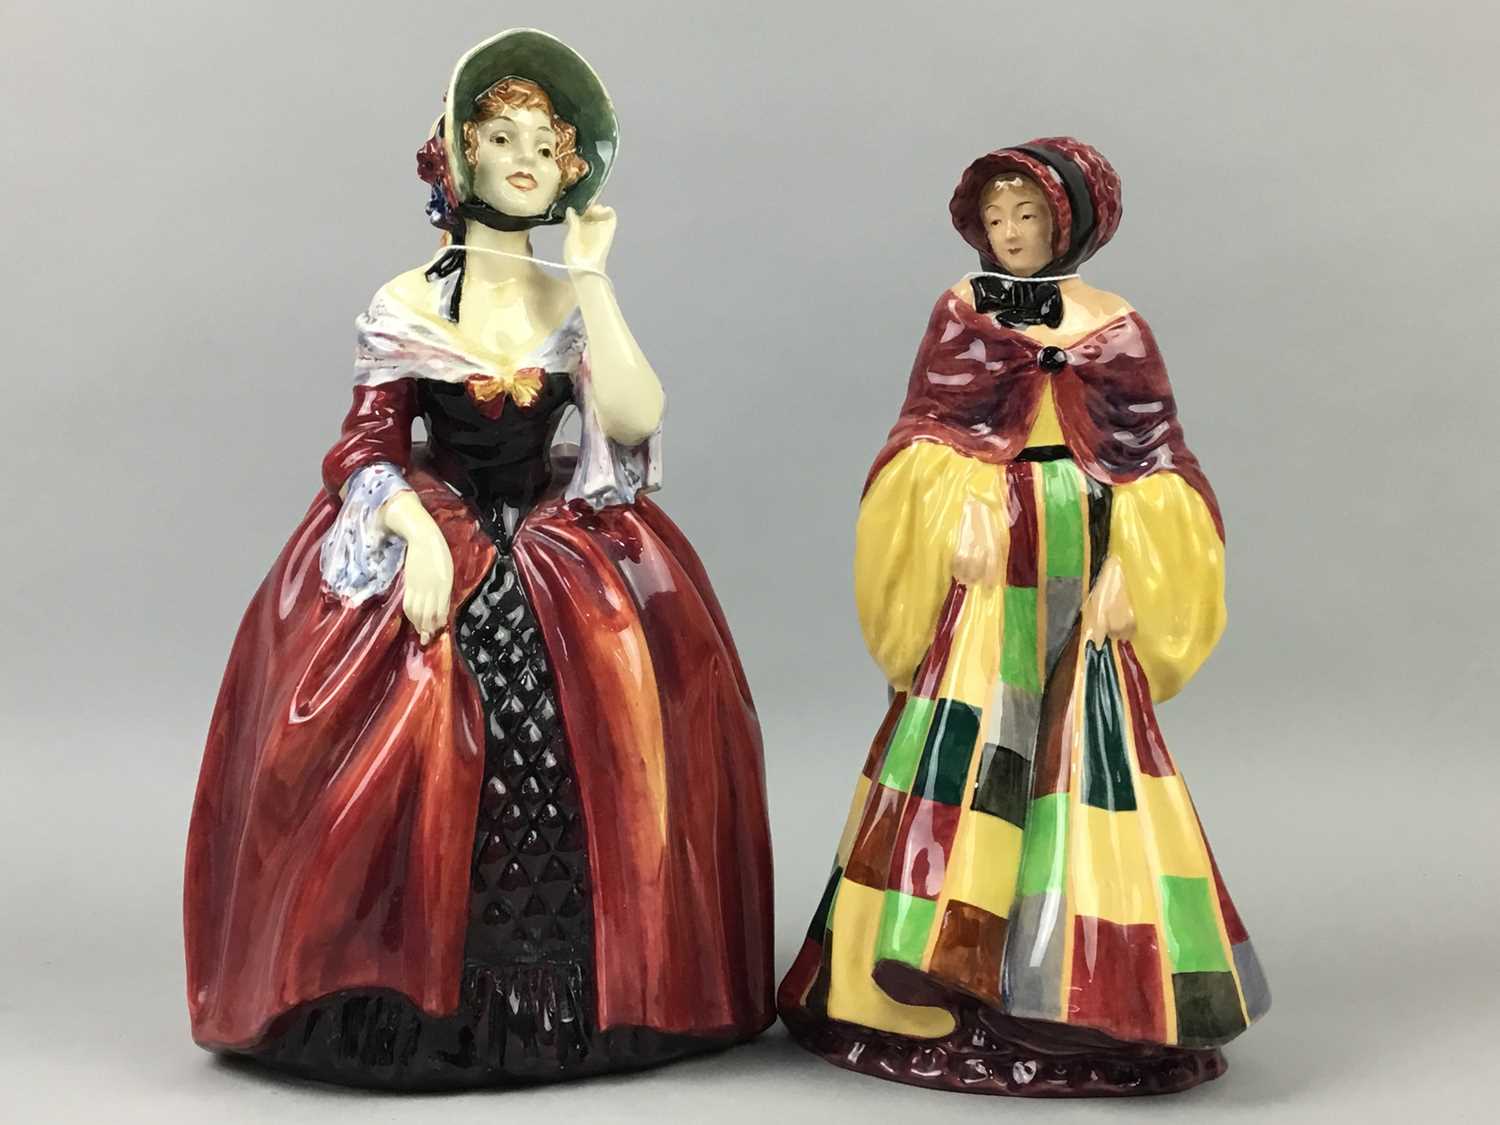 Lot 72 - A ROYAL DOULTON FIGURE OF 'THE PARSON'S DAUGHTER' ALONG WITH FIVE OTHER FIGURES